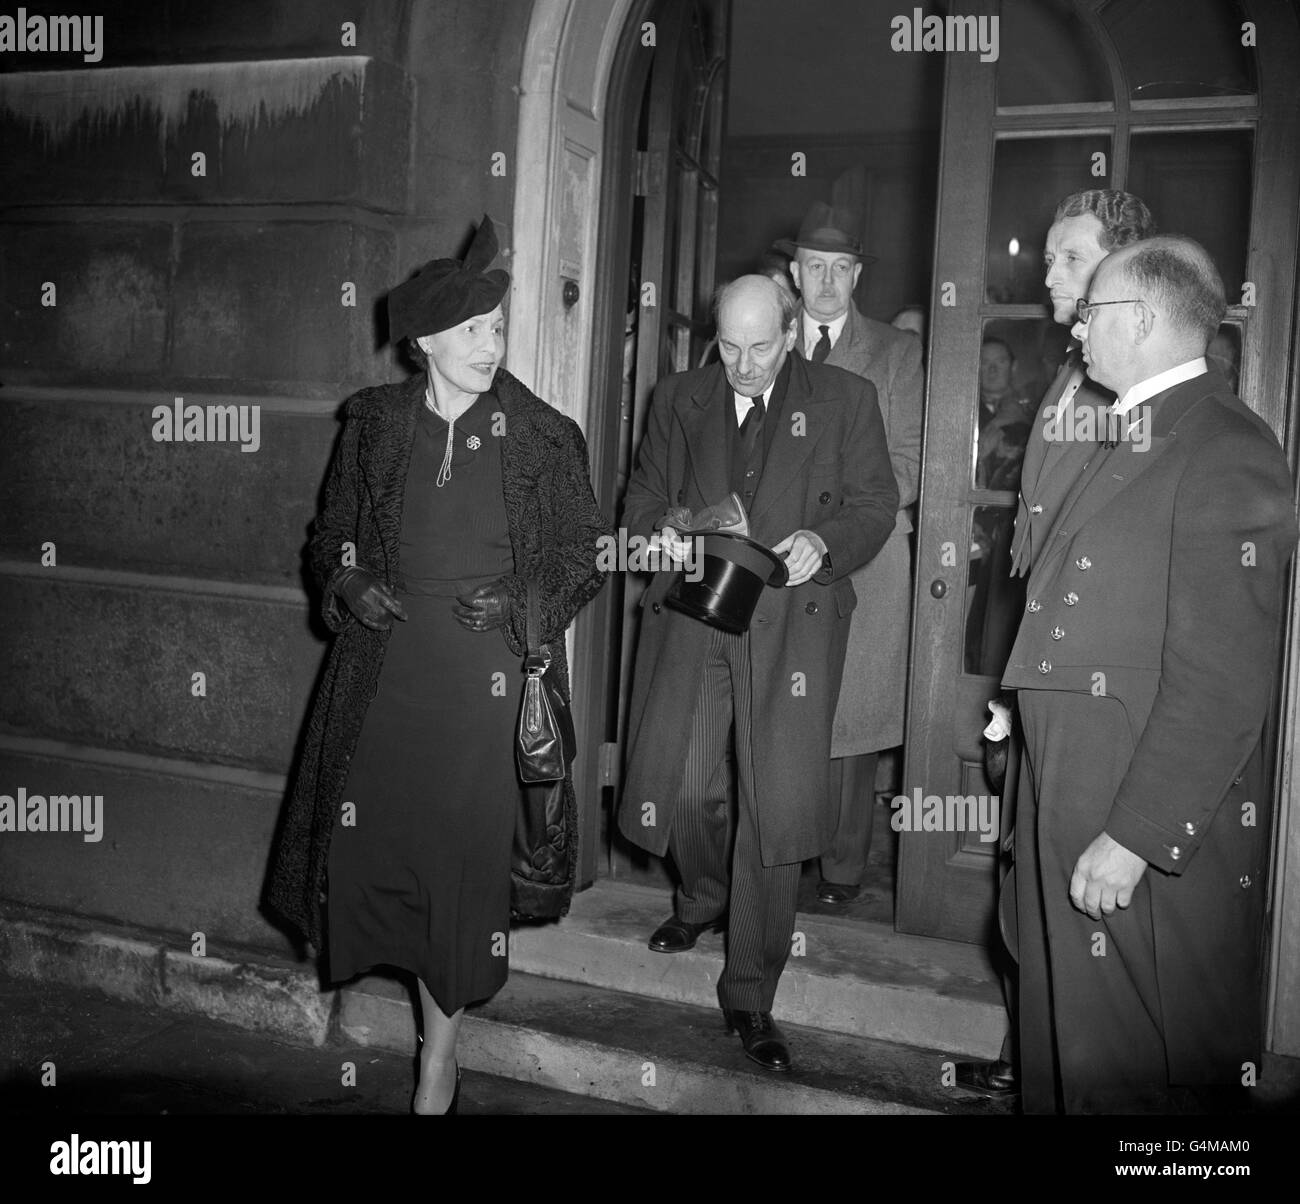 Leader of the Opposition Clement Attlee and Dr Edith Summerskill leaving St. James's Palace, after attending the Privy Council meeting following the death of King George VI. The Council is automatically summoned on the death of the monarch and is traditionally known as the Accession Council. Stock Photo